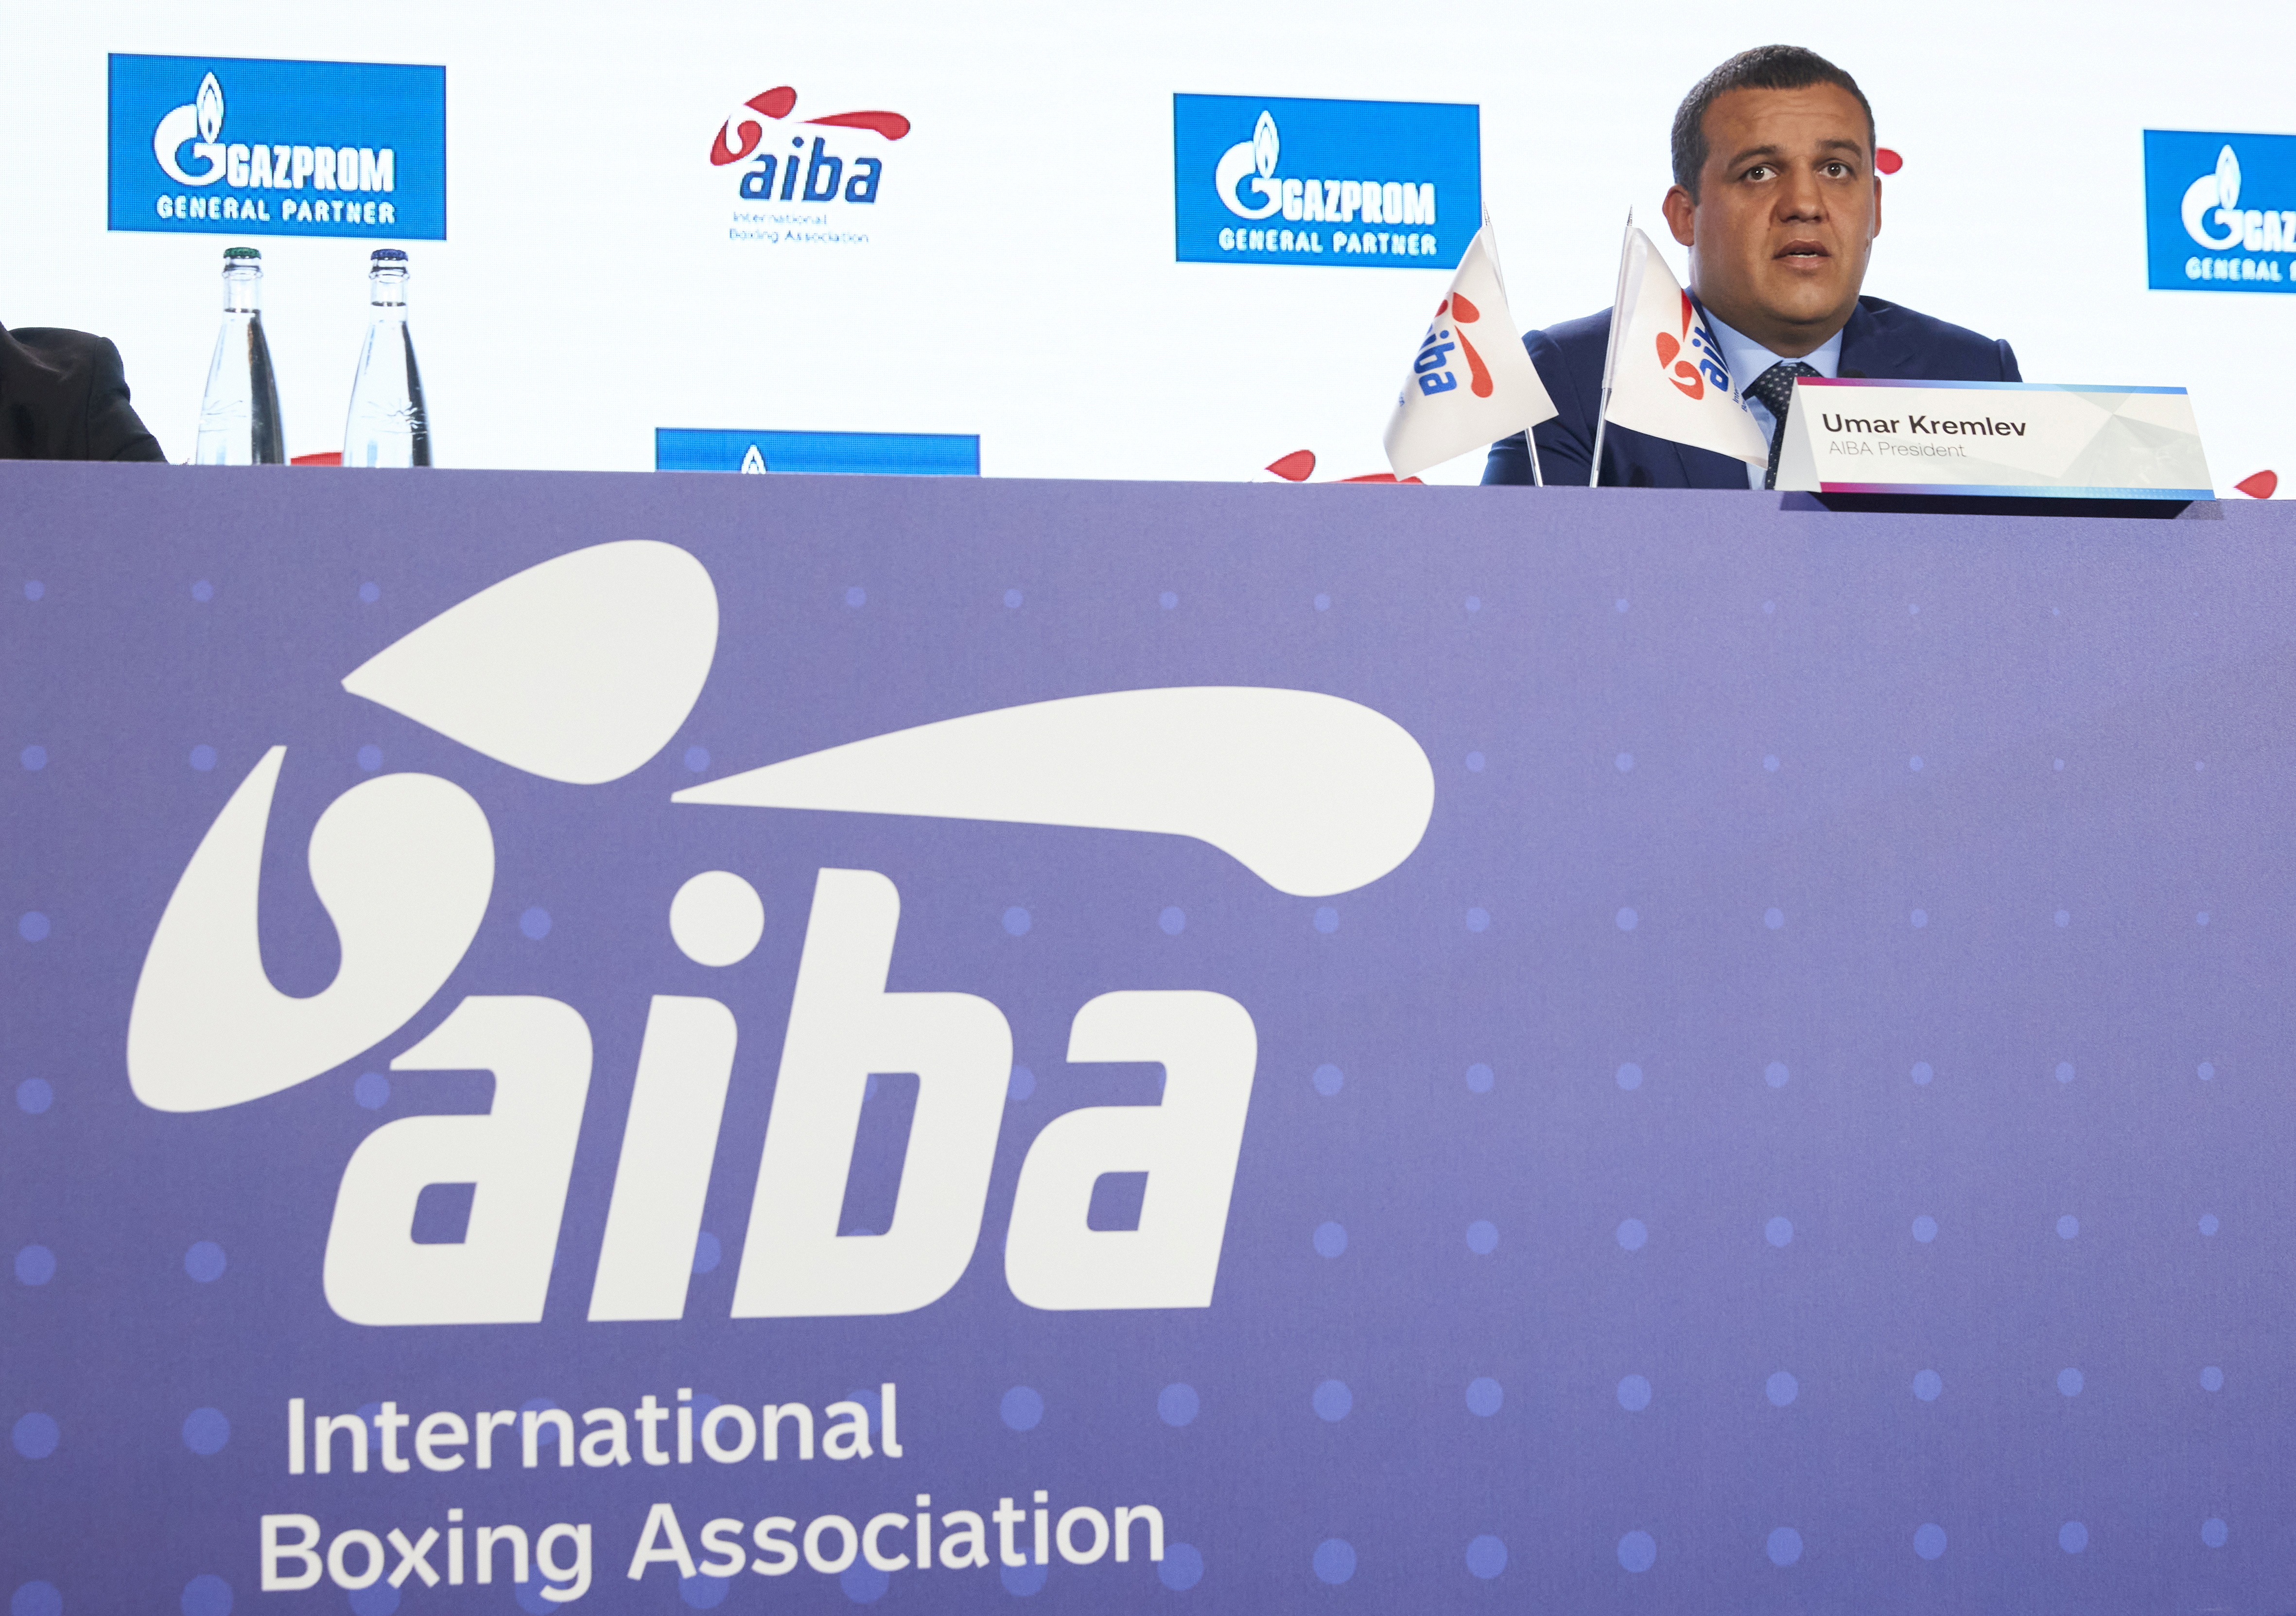 FILE PHOTO: International Boxing Association (AIBA) President Umar Kremlev attends a news conference ahead of the Tokyo 2020 Olympic Games in Lausanne, Switzerland June 28, 2021.  REUTERS/Denis Balibouse/File Photo